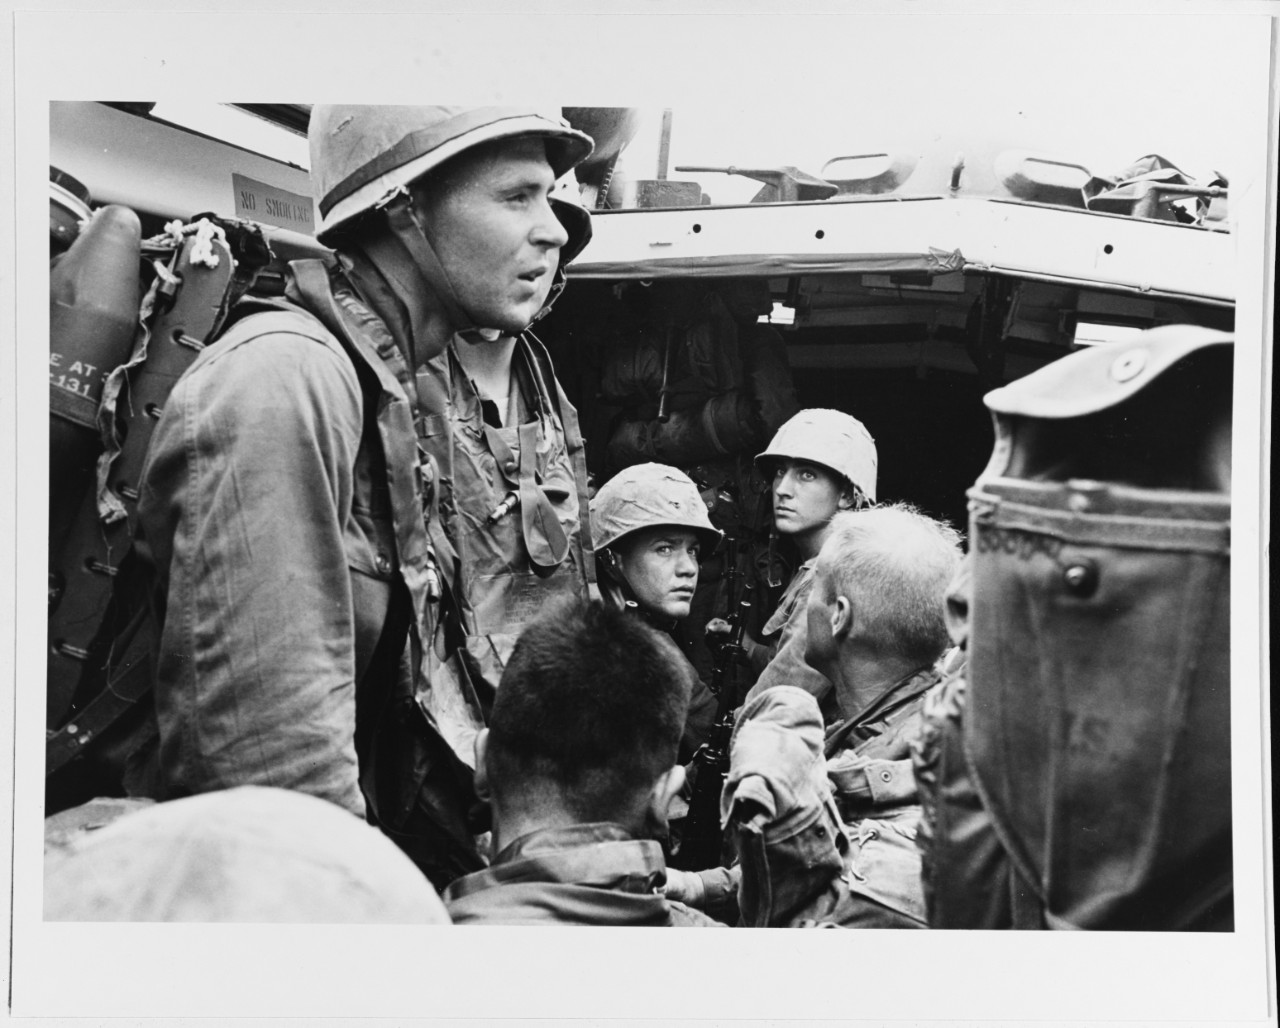 Marines in a tracked landing vehicle.